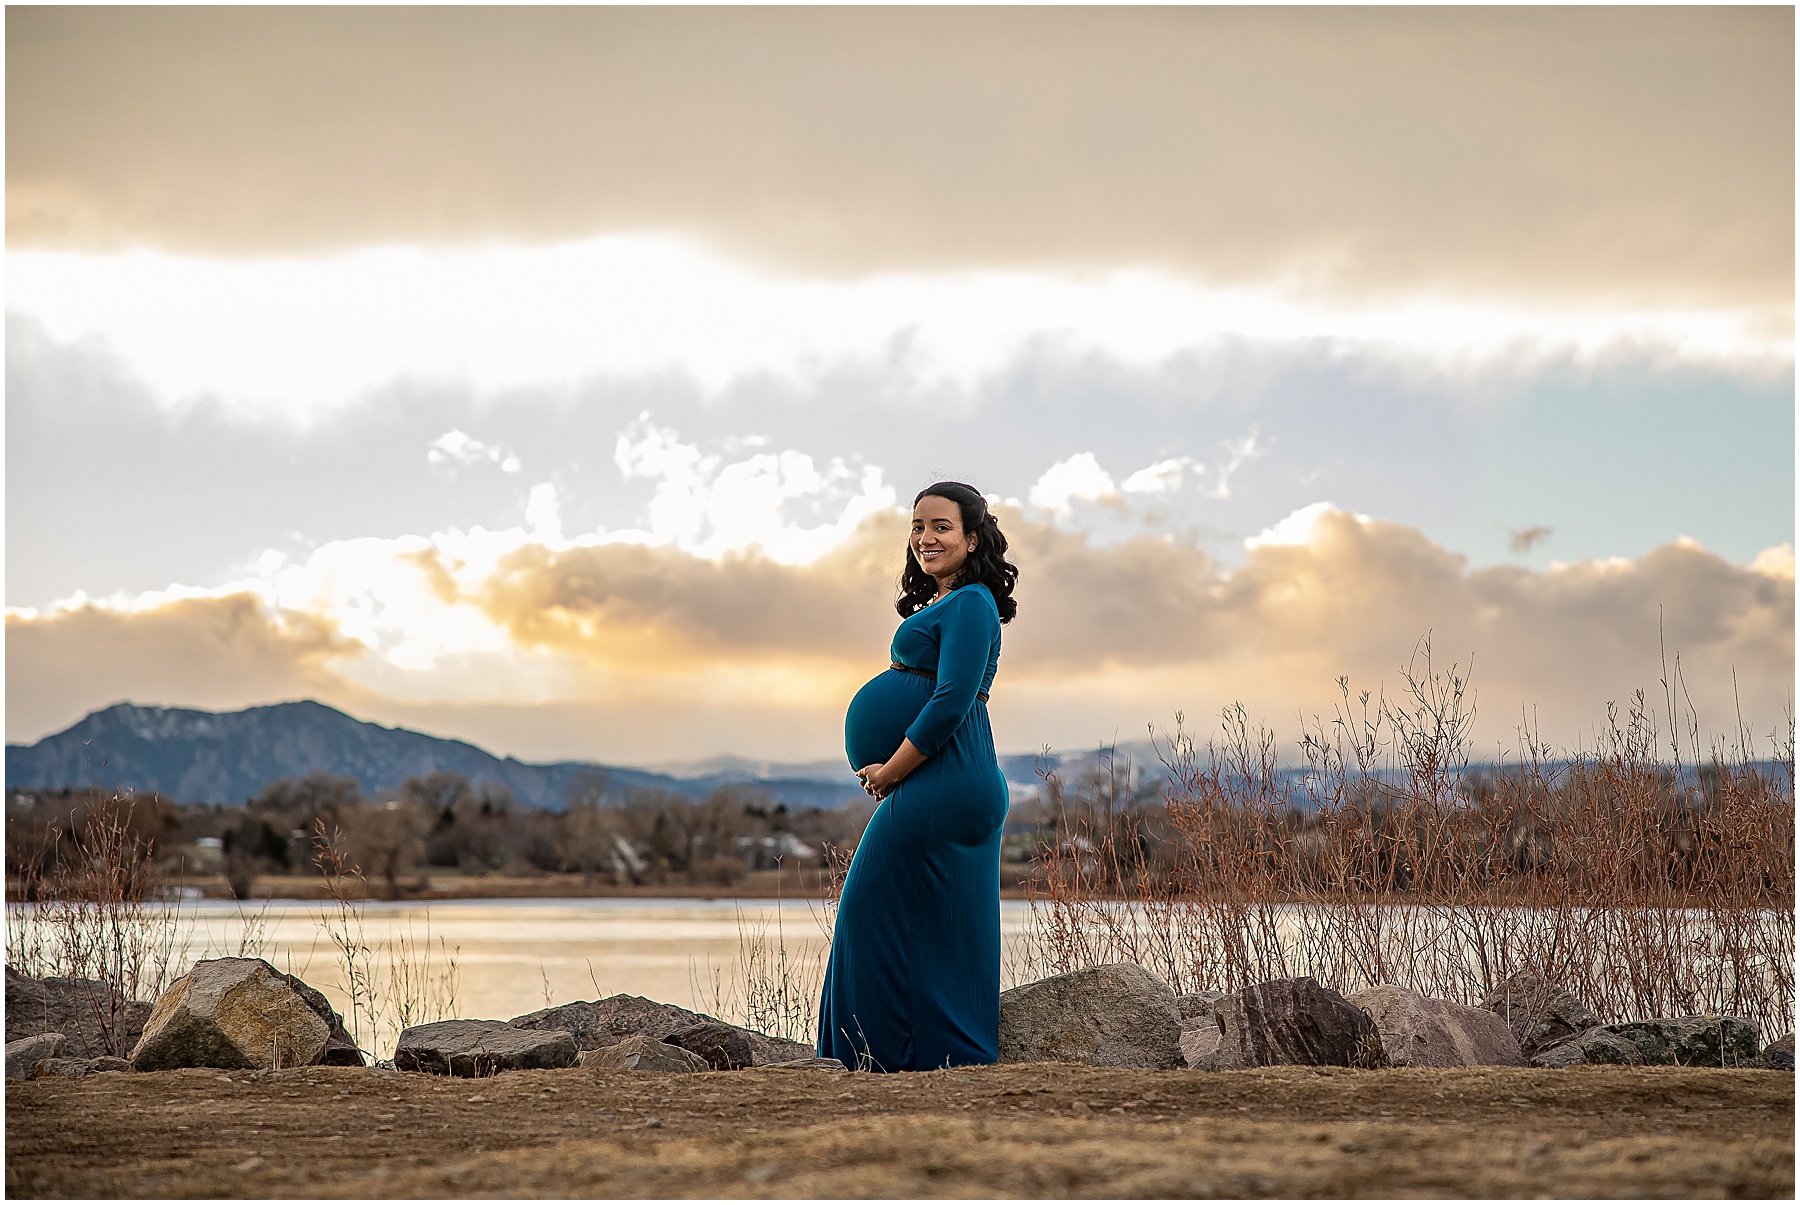 Maternity Photos, maternity photo shoot, denver maternity photographer, baby bump, maroon dress, mom to be, experienced maternity photographer, affordable maternity photographer, sunset photos, golden hour, outdoor photography, winter photoshoot, blue maternity dress, third trimester, first time mom, boy mom, outdoor maternity photography, Colorado maternity photoshoot